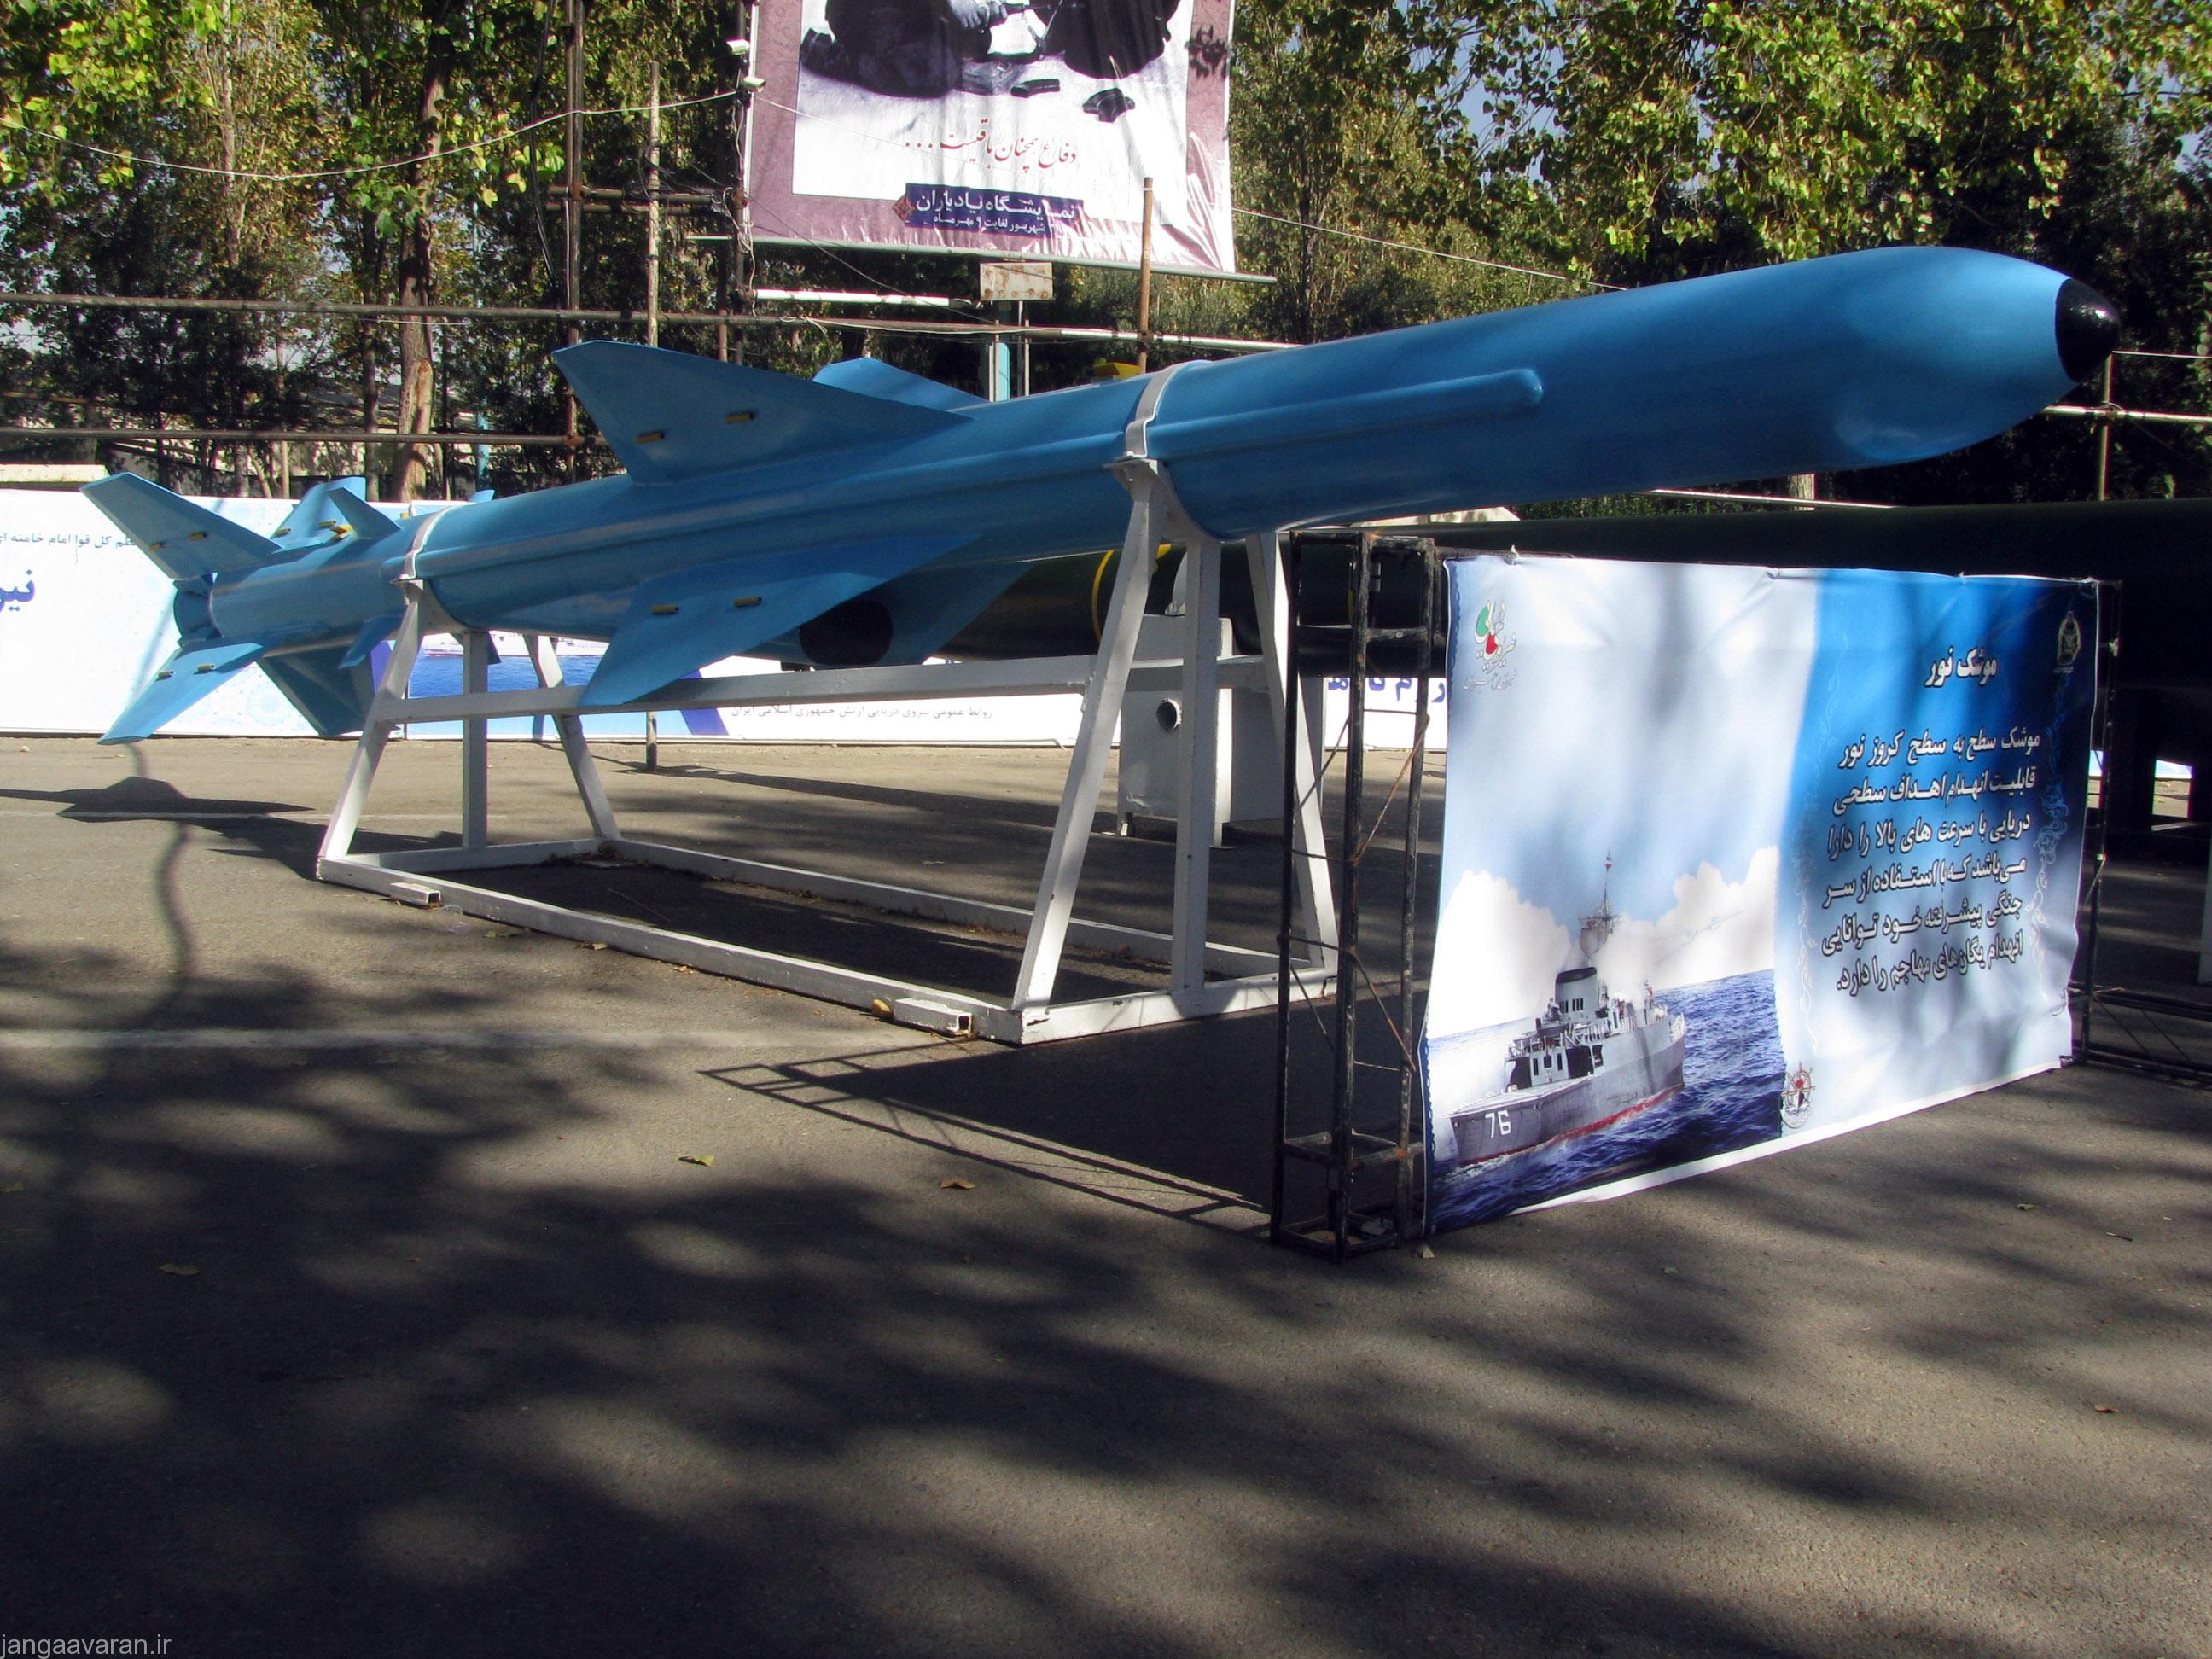 Noor_missile_in_Holly_Defence_Exhibition_2.jpg